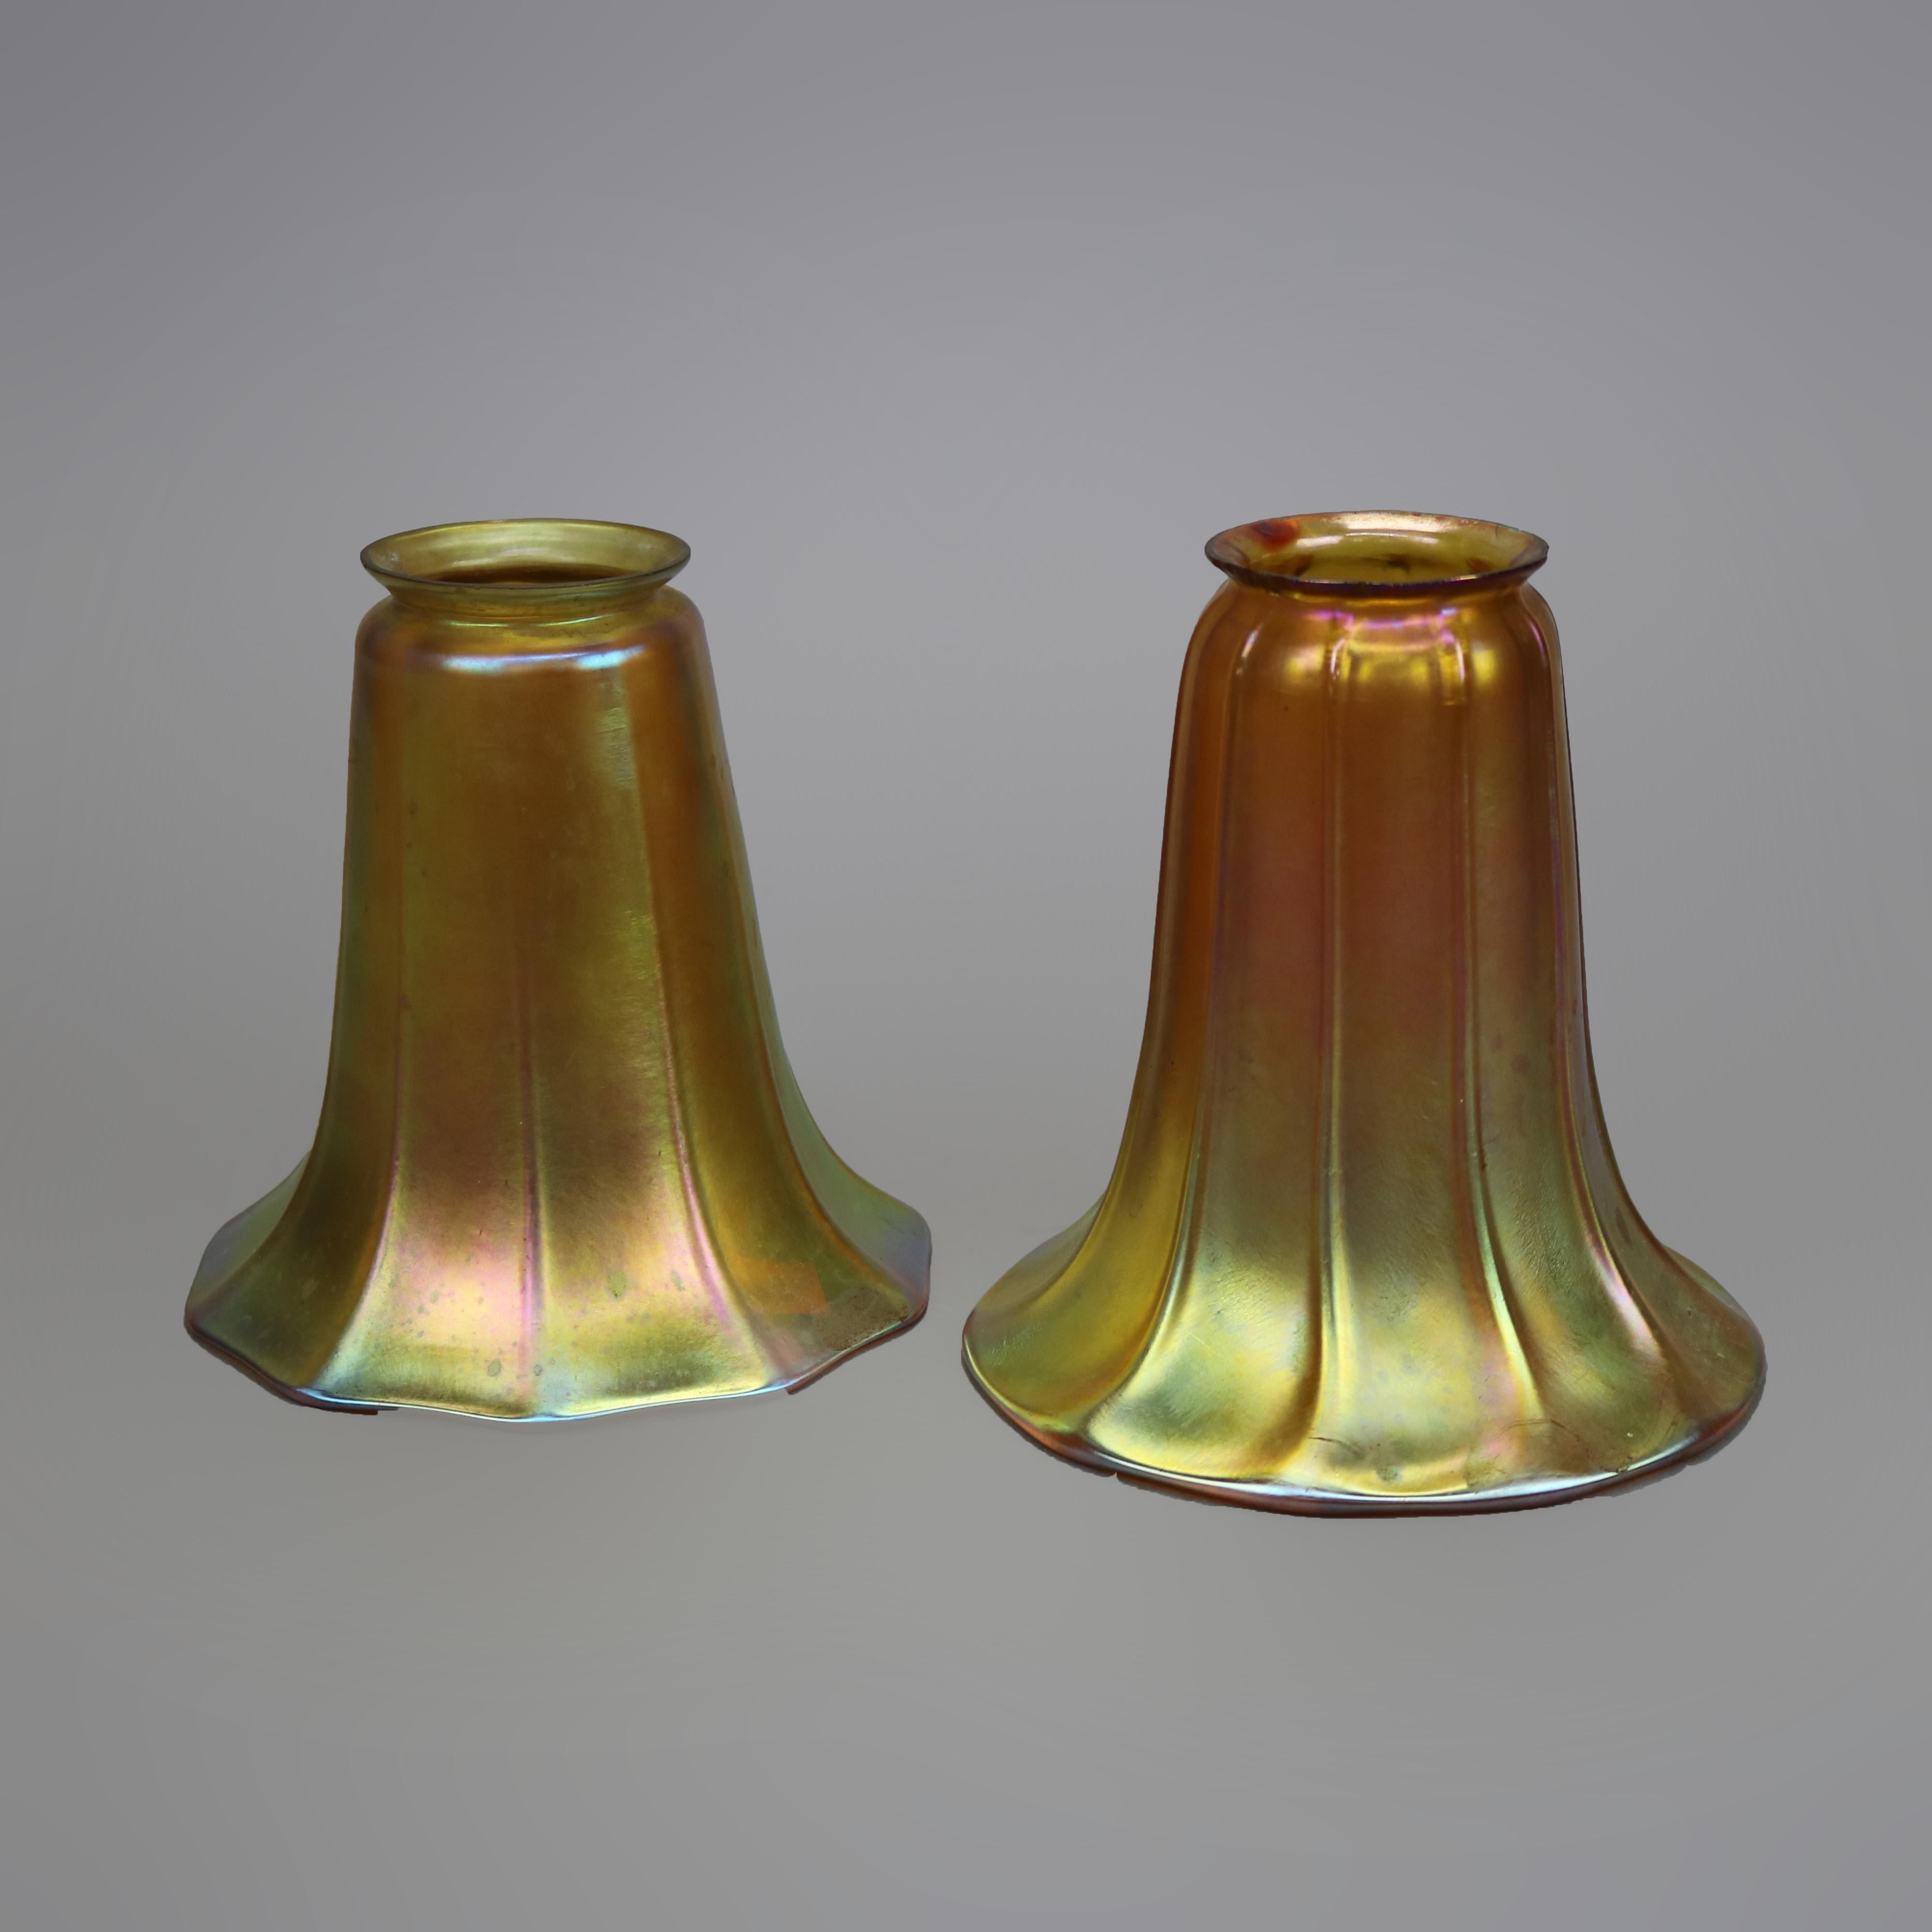 Two antique glass light or lamp shades in the manner of Steuben offer gold aurene construction in tulip form, one with acid etched maker mark as photographed, c1920

Measures - 5.75'' H X 5'' W X 5'' D; 5.5'' H X 5'' W X 5'' D.